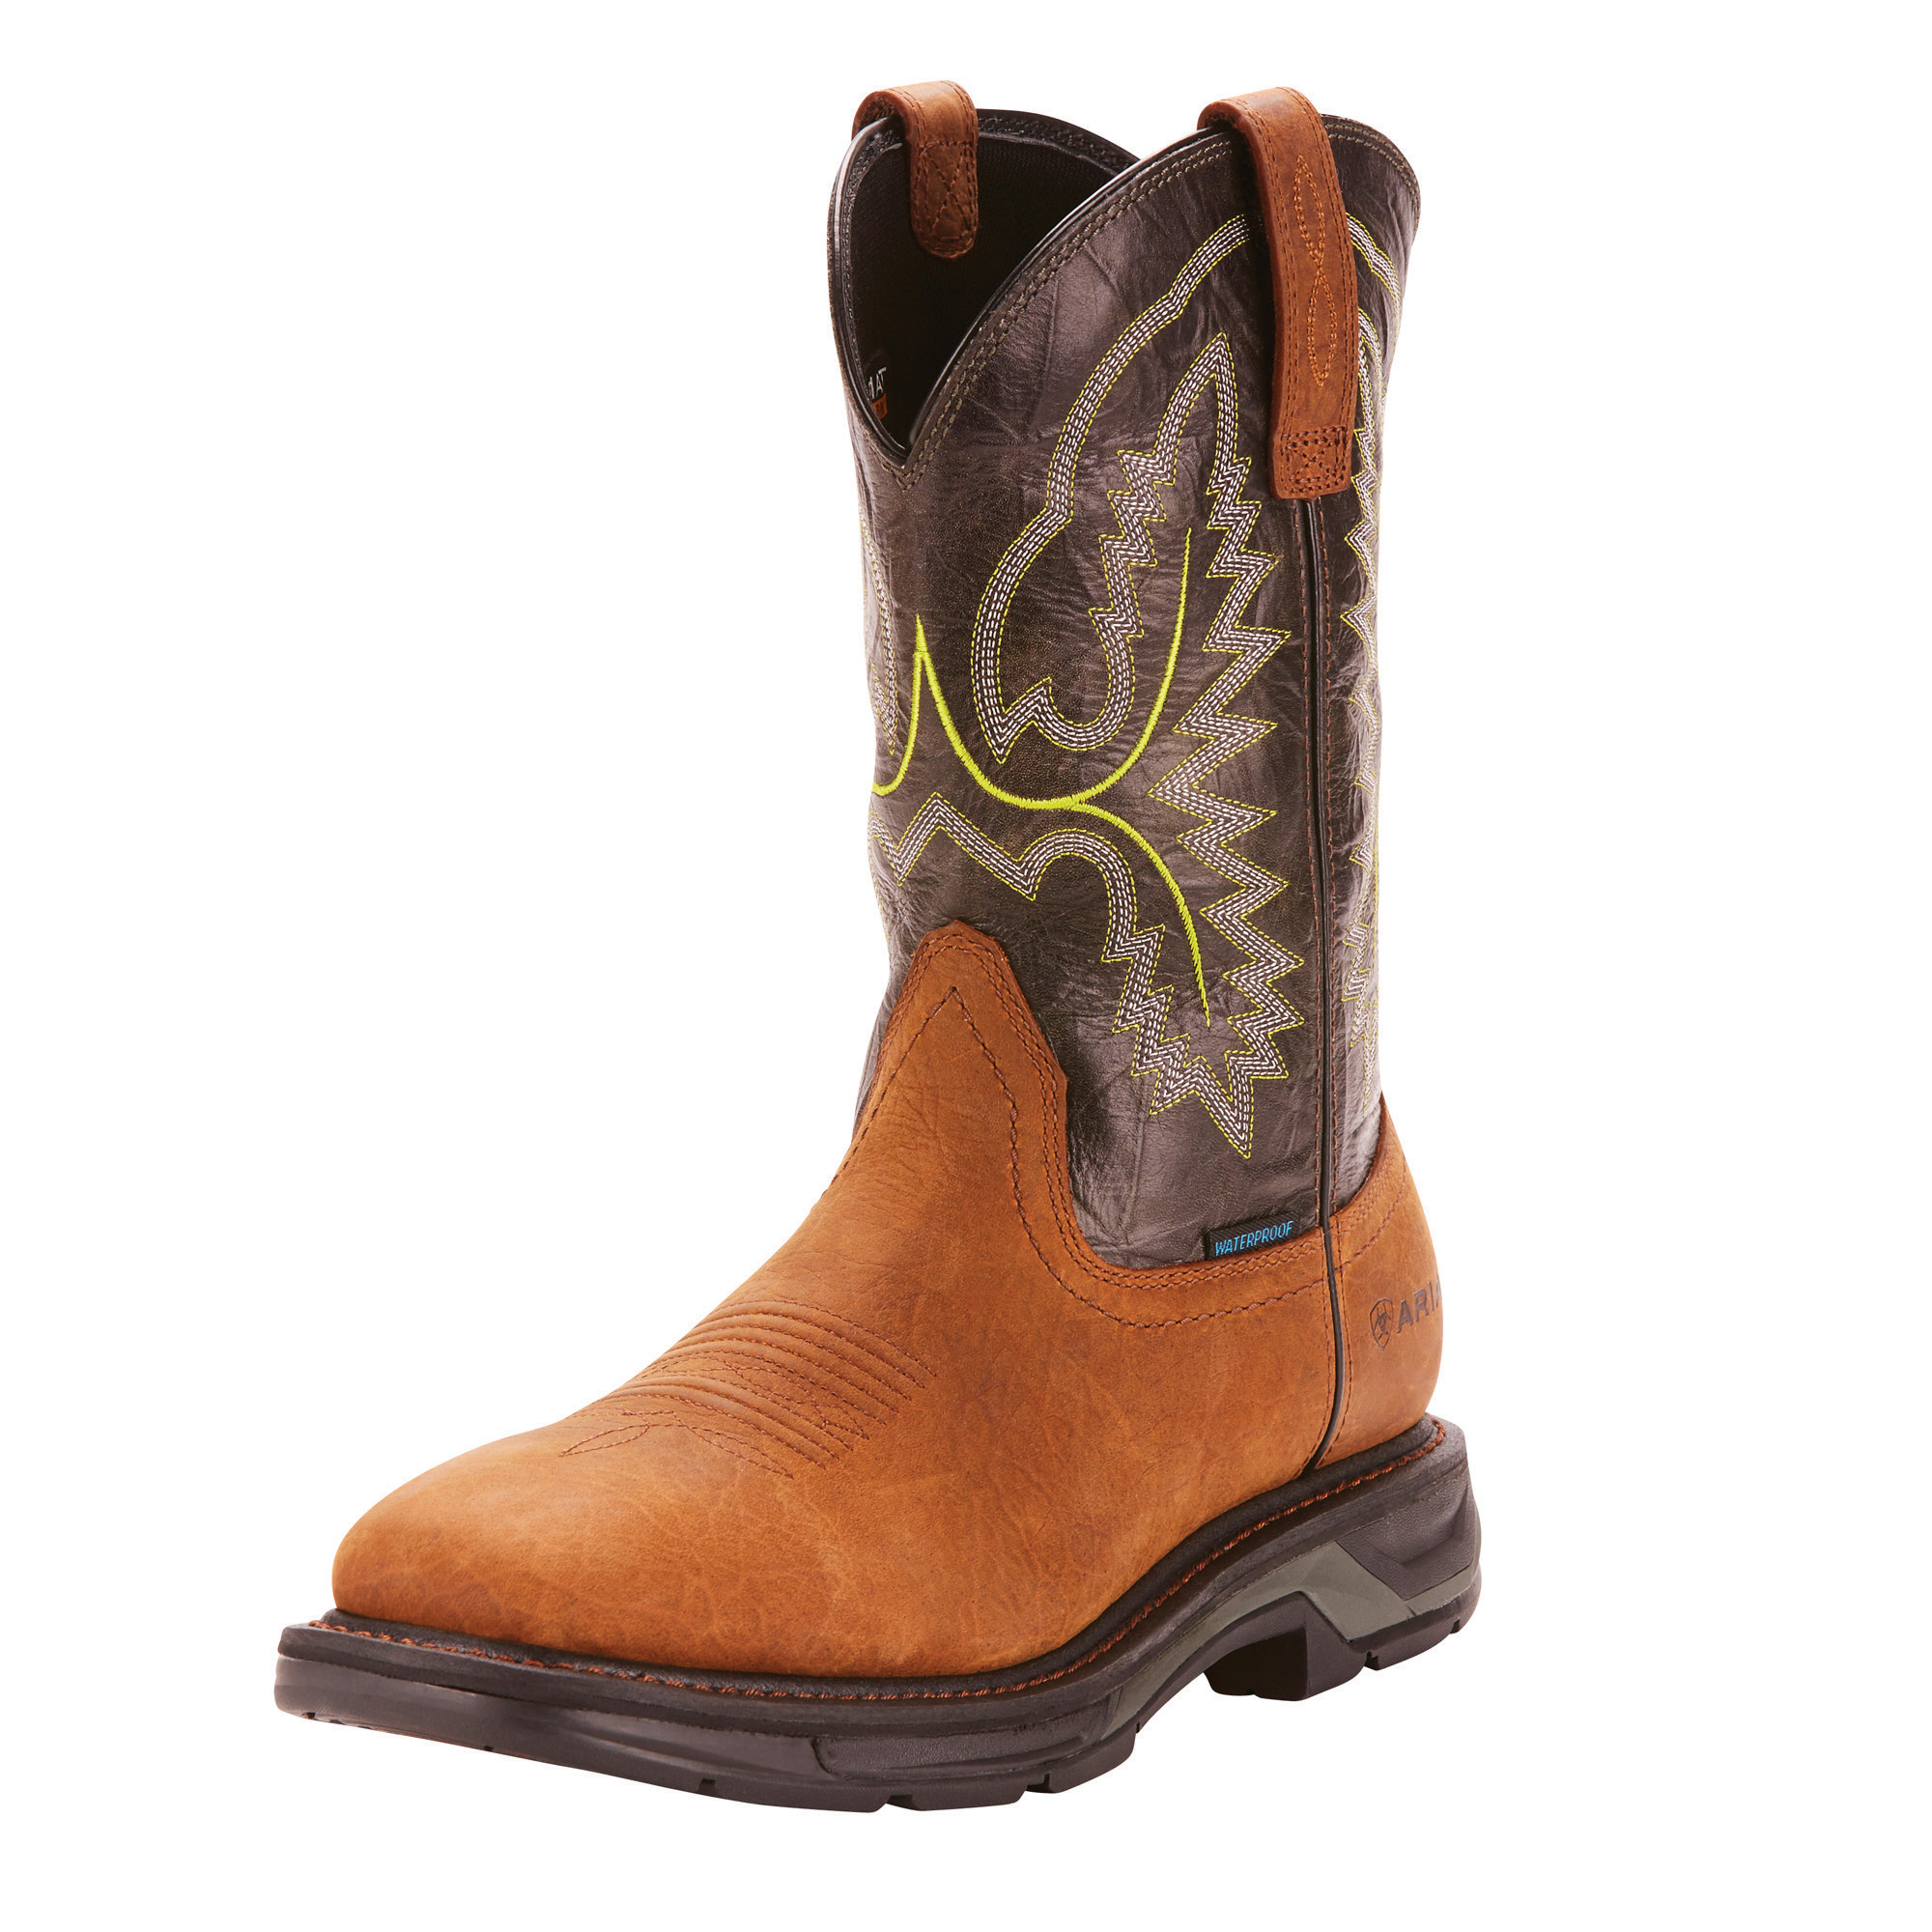 Are Ariat Wotkhogs Made With Real Leather?